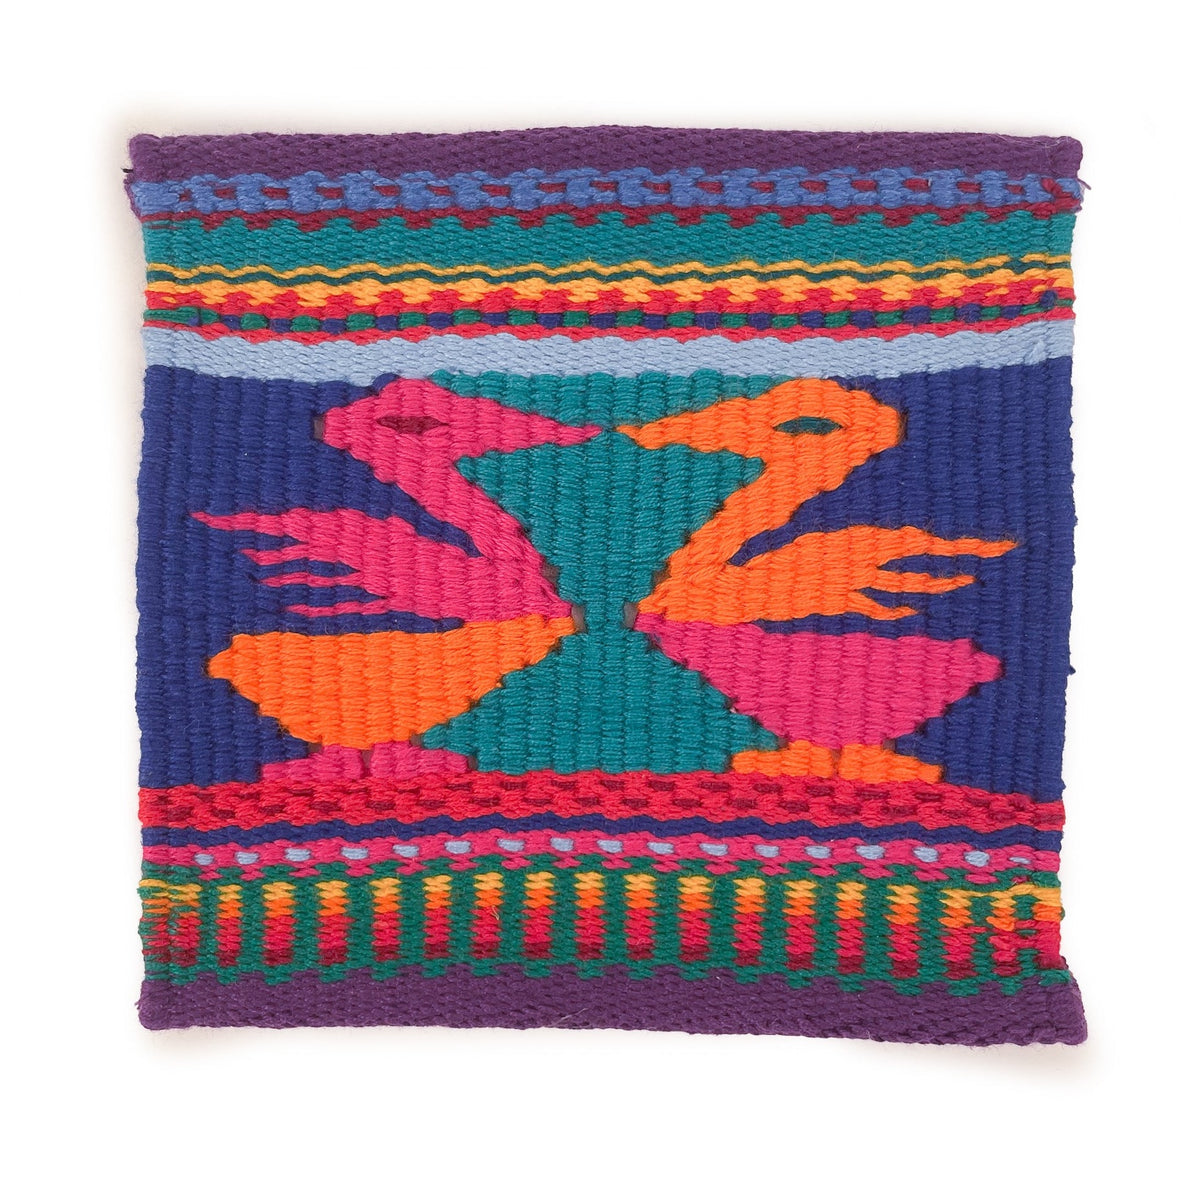 Colorful tapestry woven coaster, featuring two birds in pink and orange facing each other.  Coaster has a multicolor background of teal and deep blue, with a purple boarder and multicolor striped details